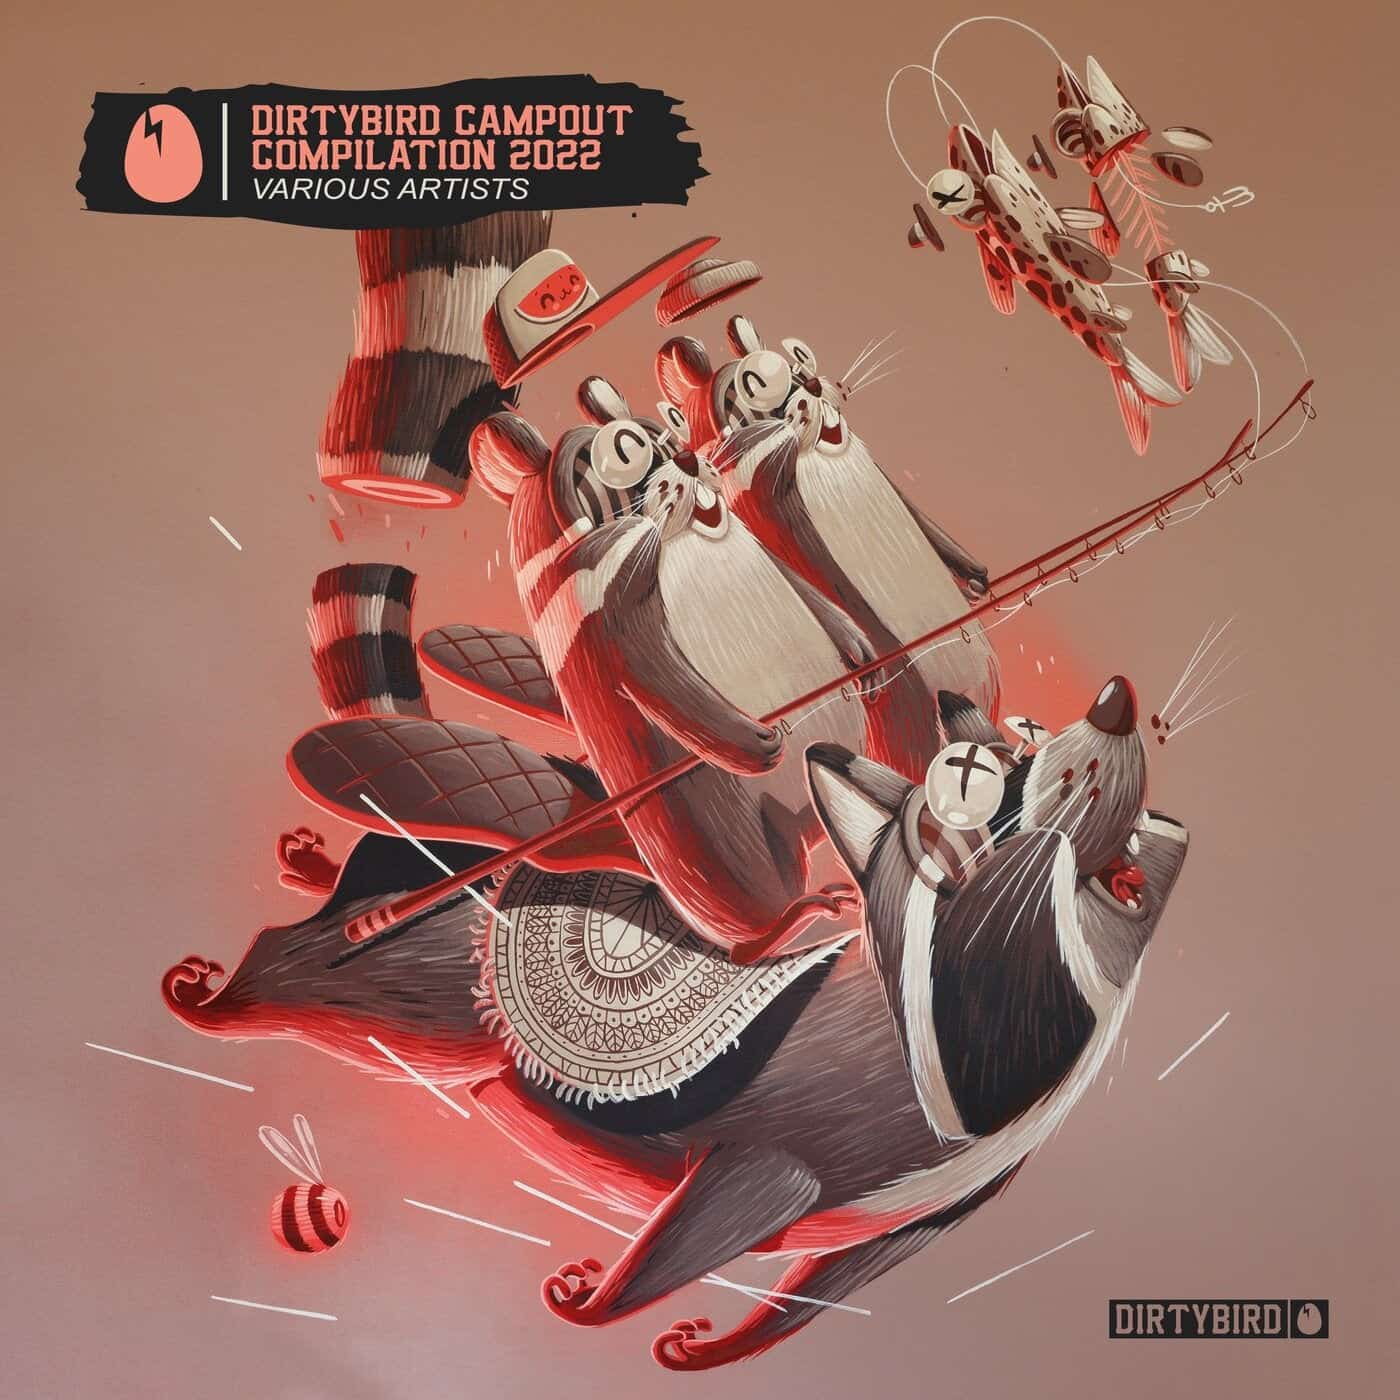 image cover: VA - Dirtybird Campout Compilation 2022 / DB292